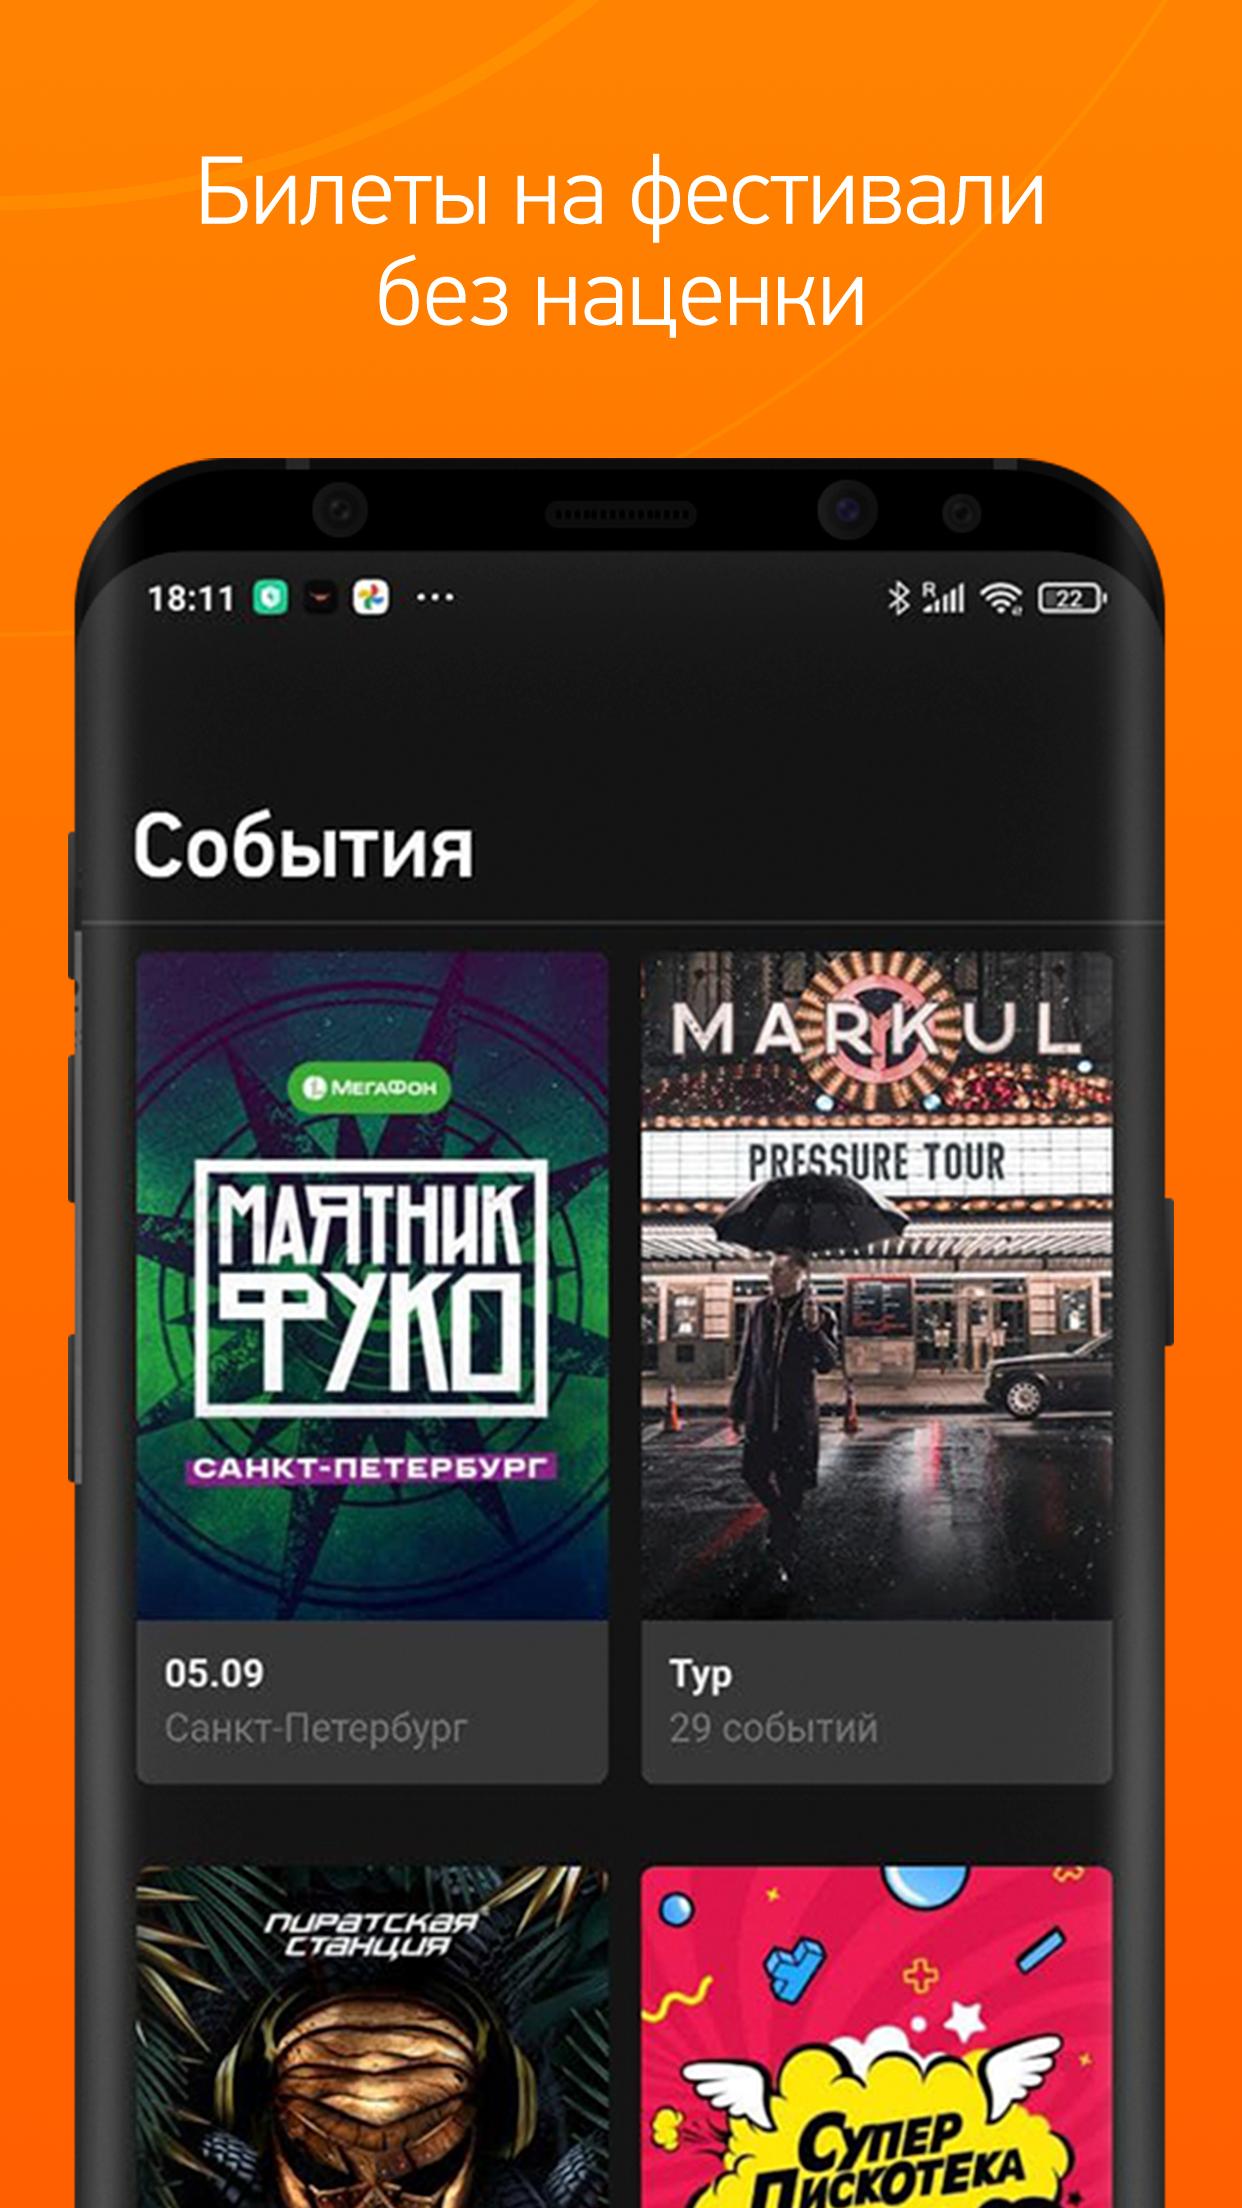 Record Dance Radio for Android - APK Download